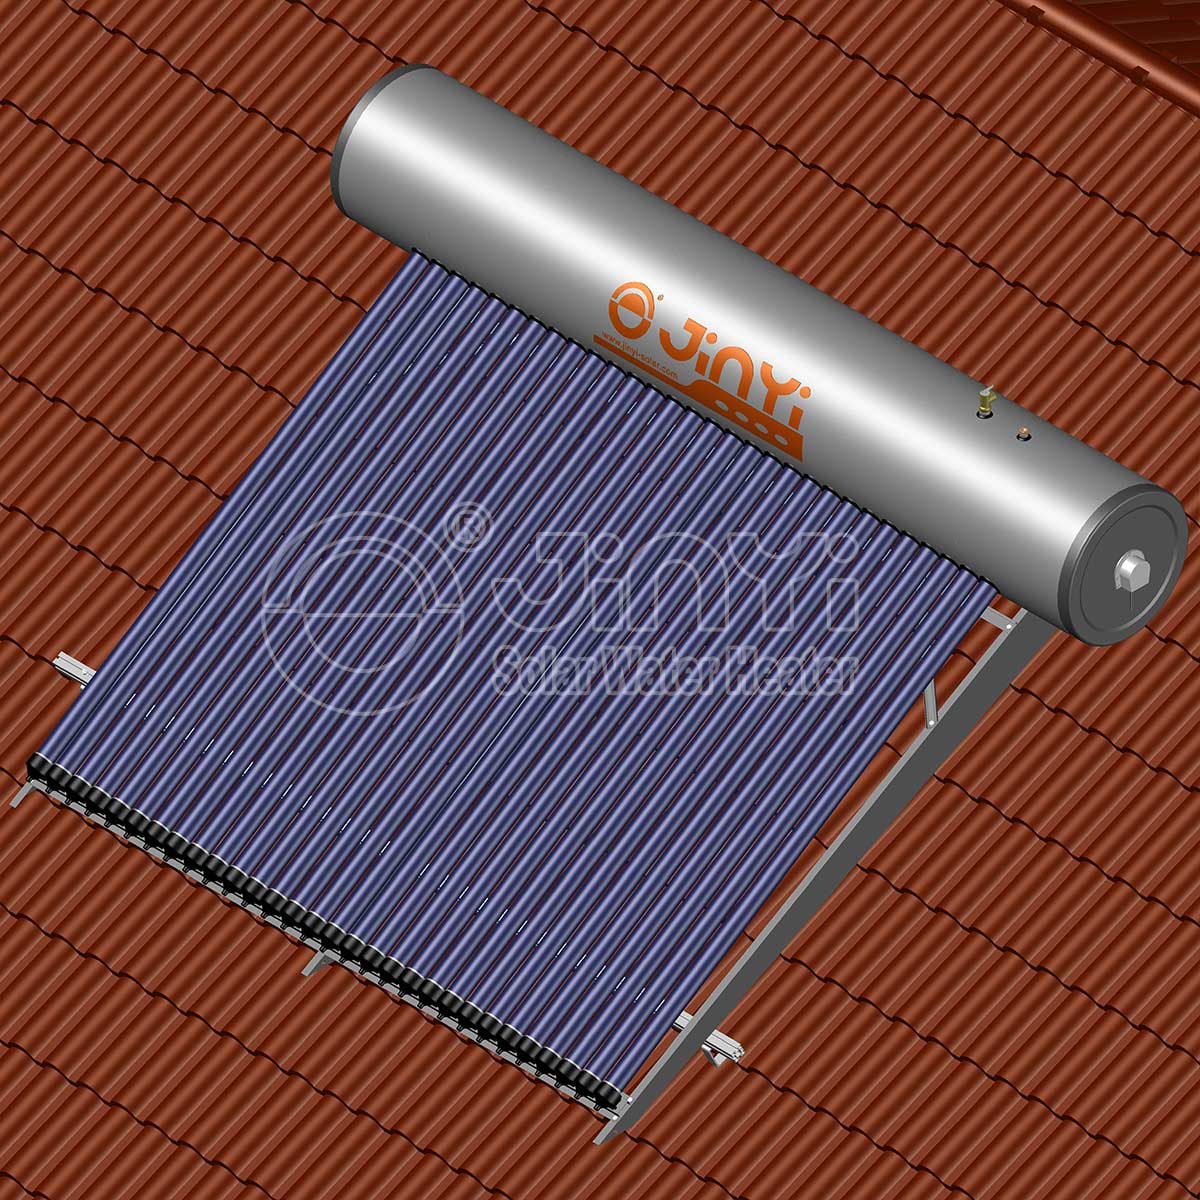 Heat Pipe Solar Water Heater Installation Display Sloped Roof